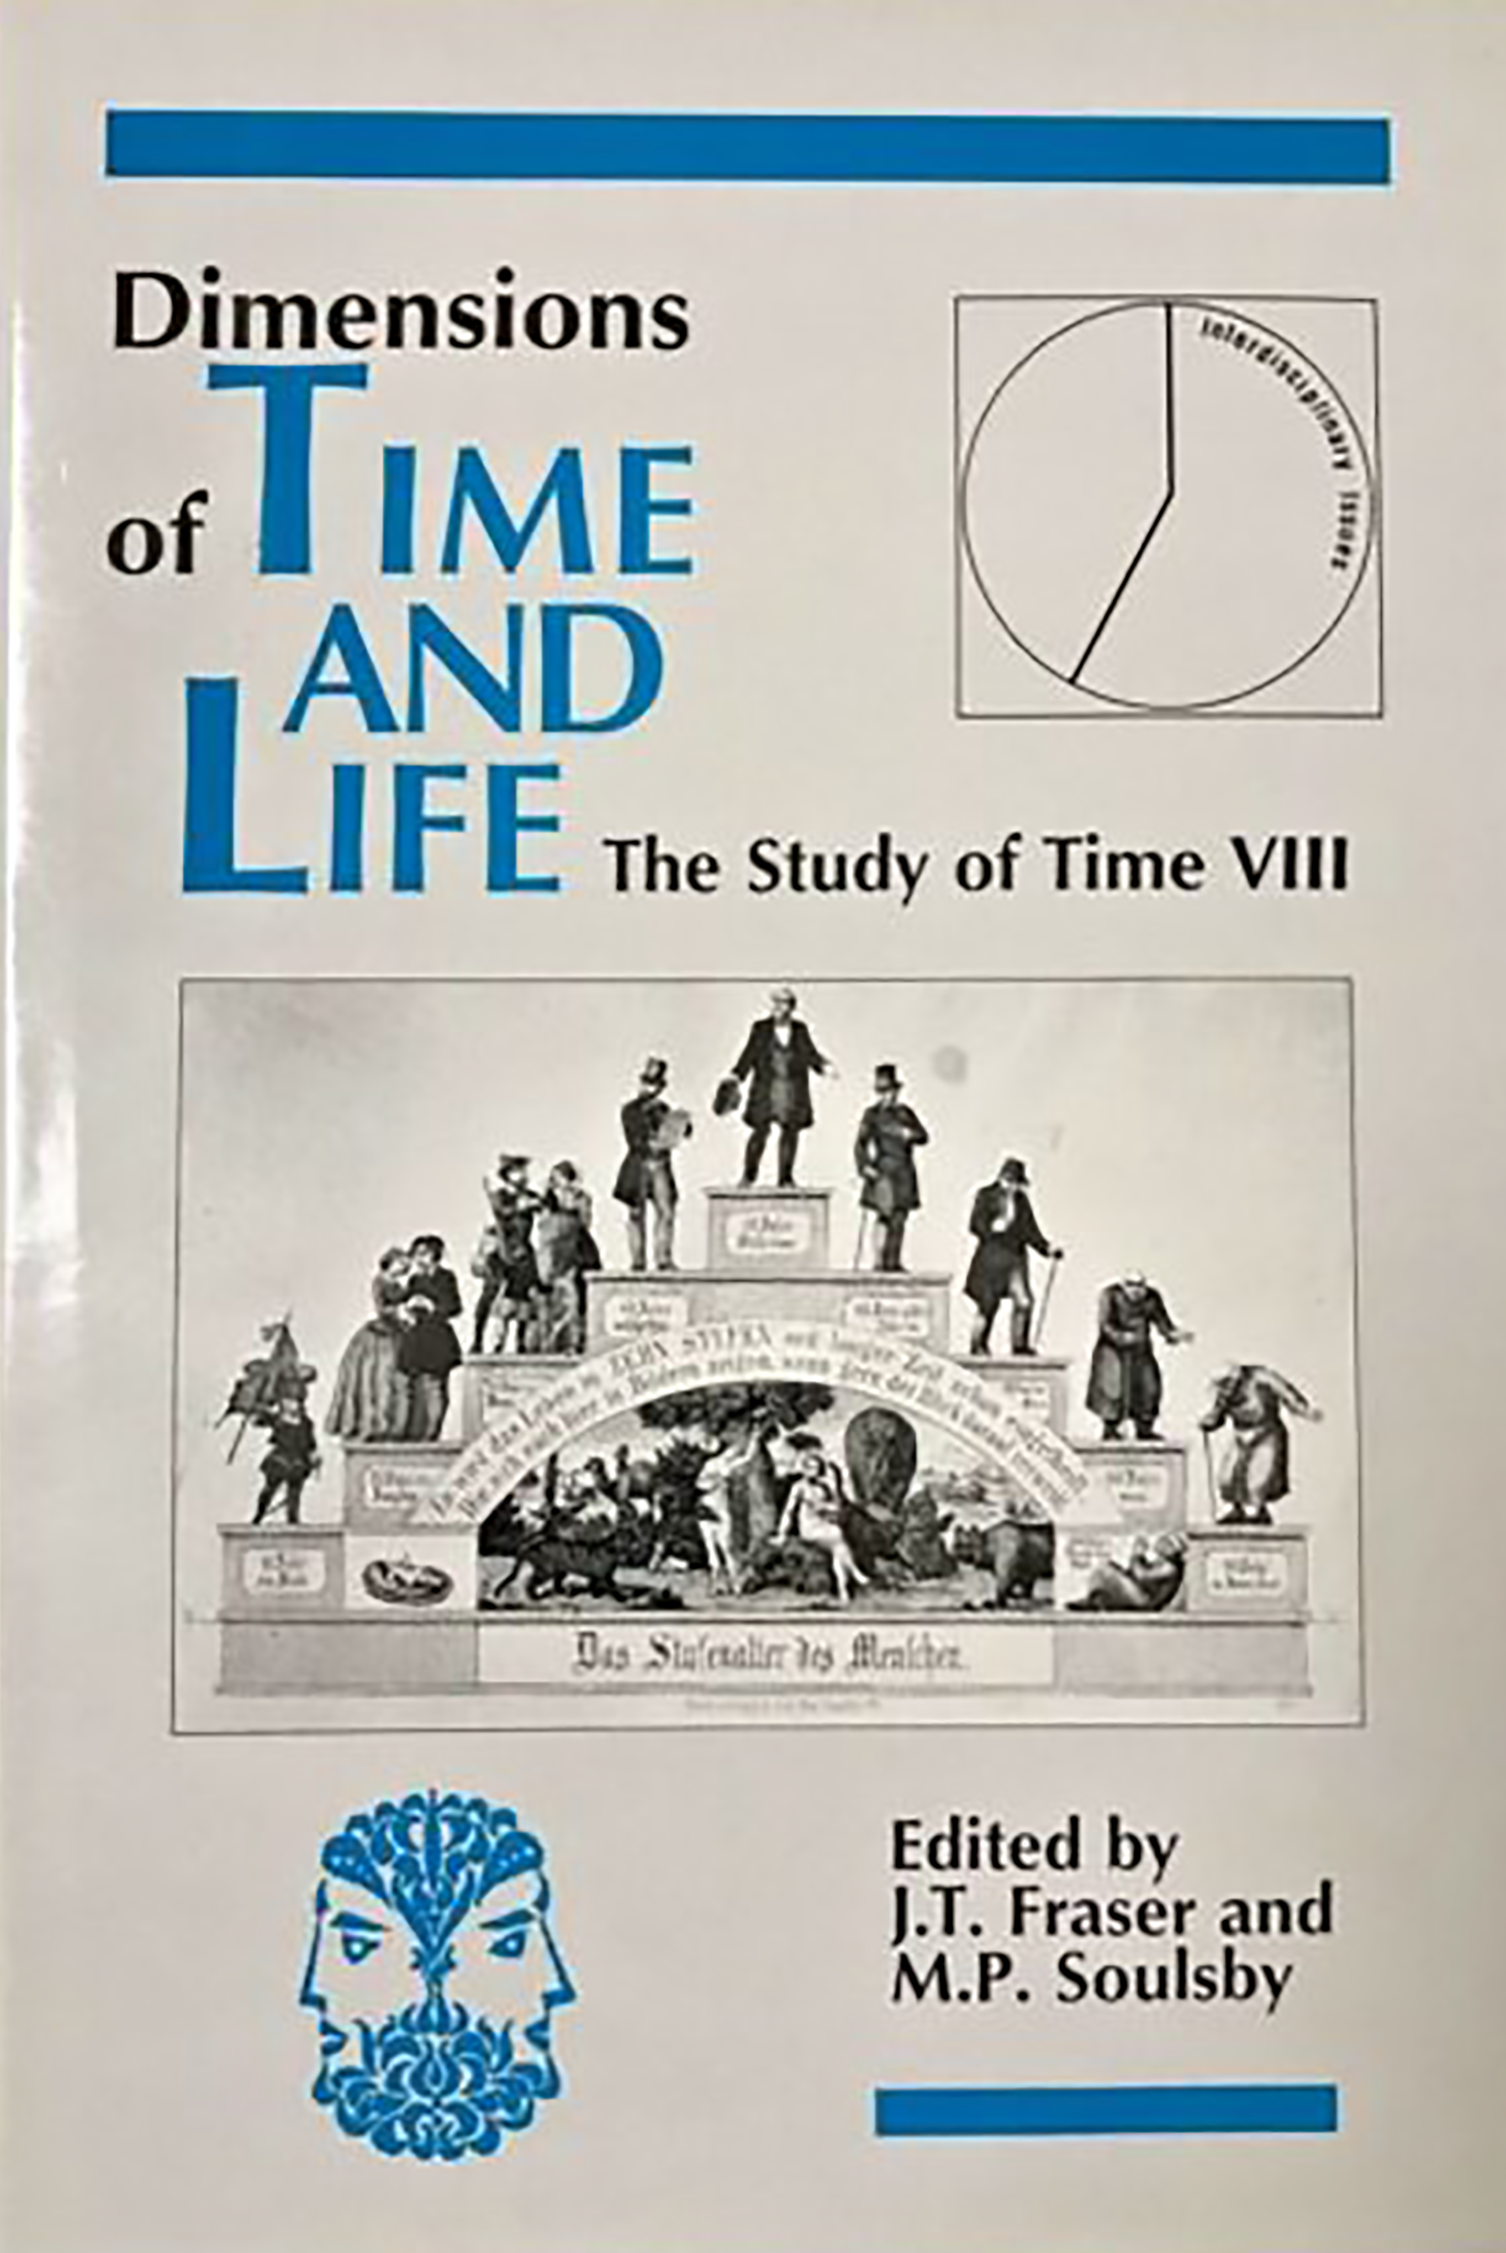 The Study of Time VIII